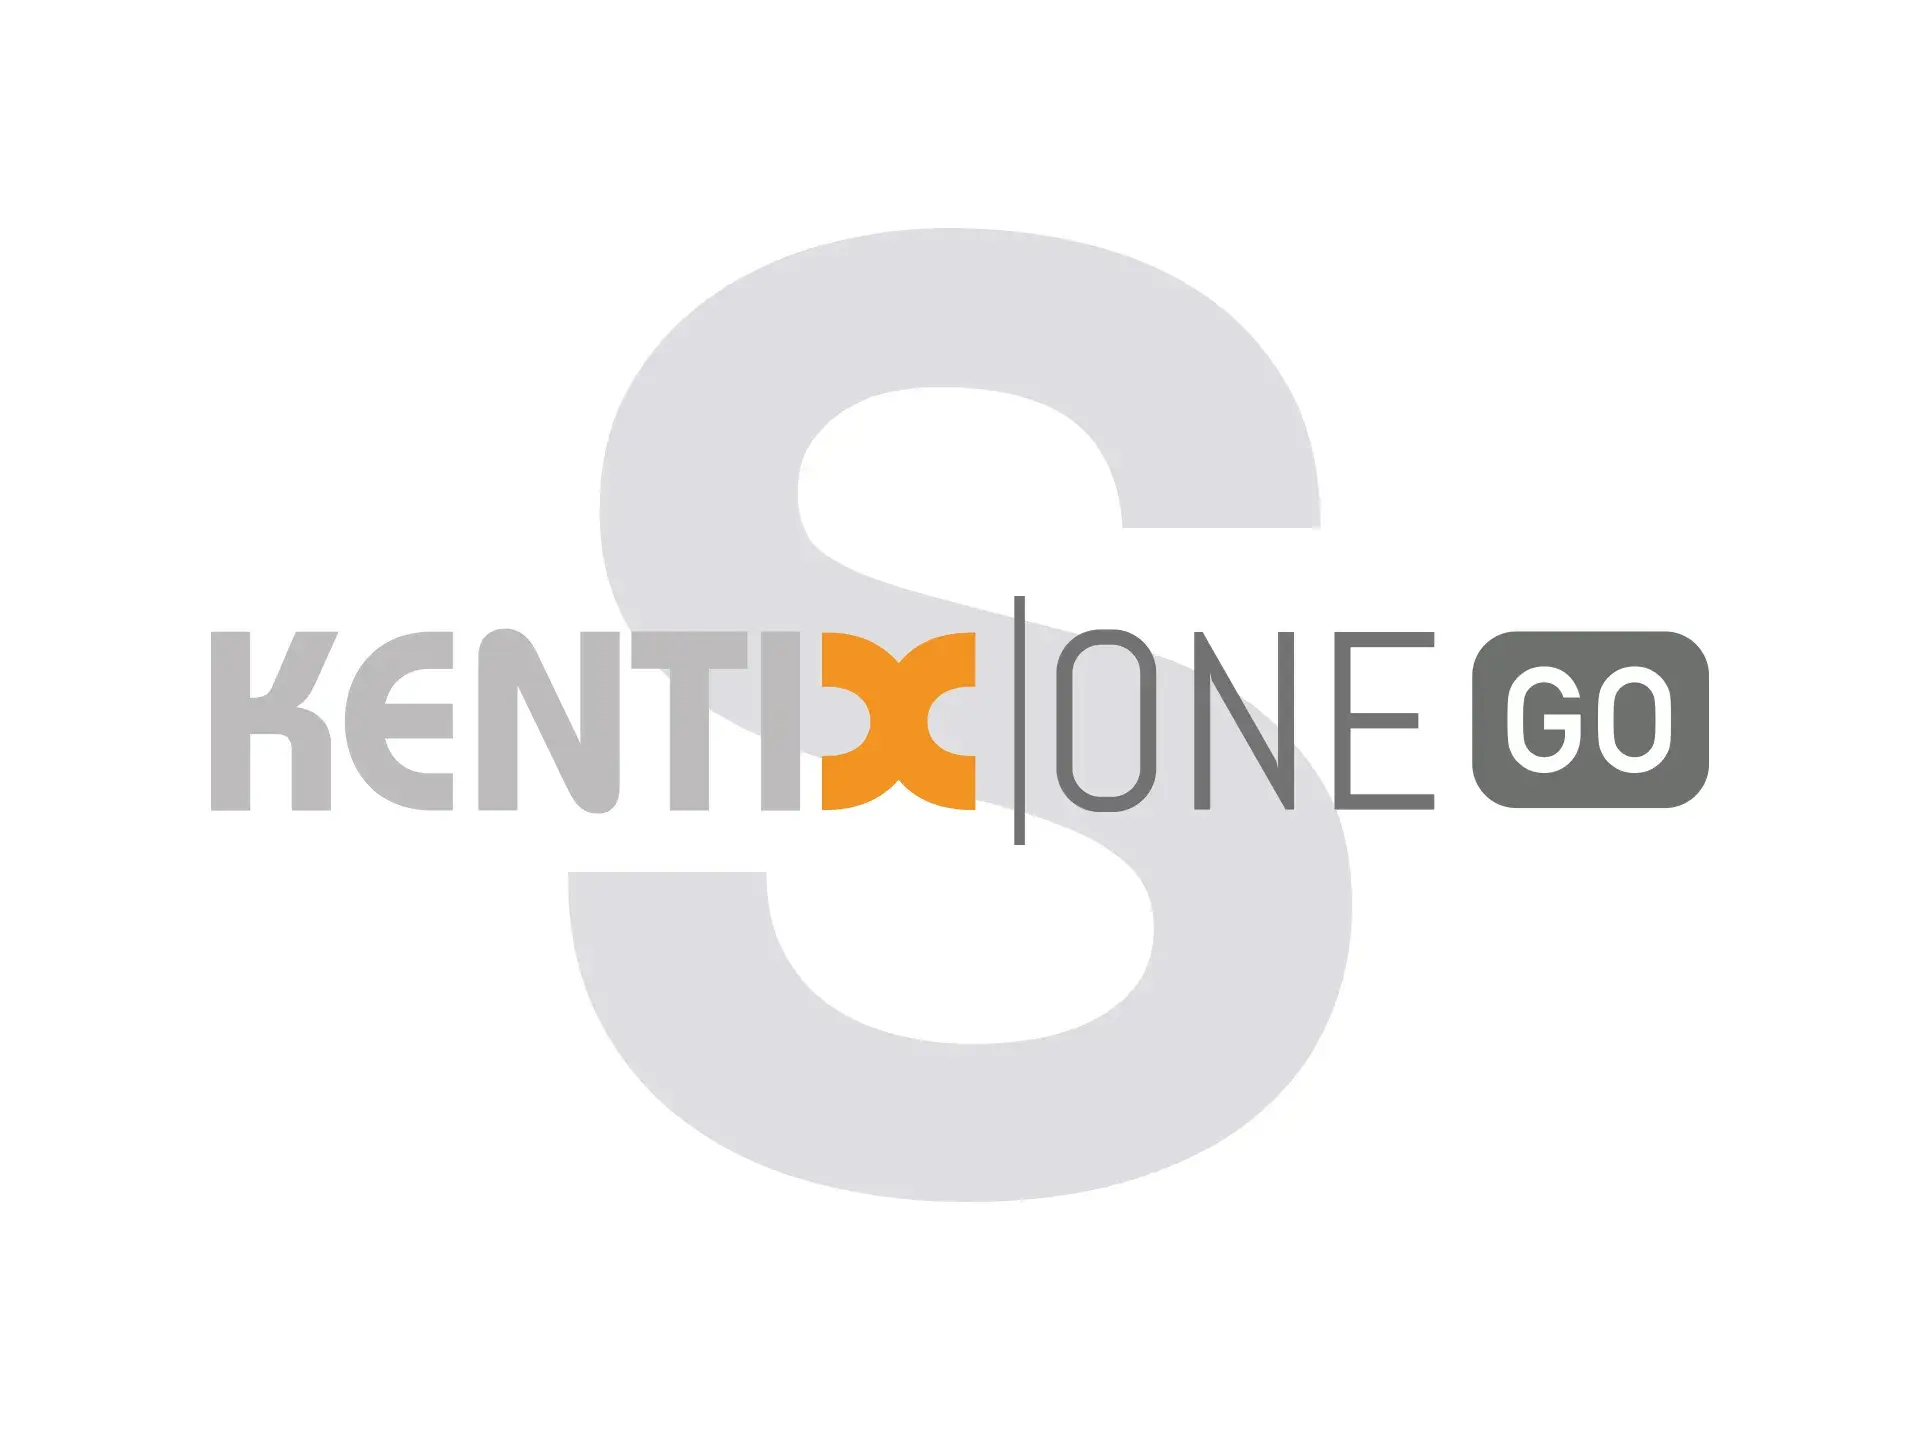 KentixONE-GO for 25 devices (50 virtual devices), term 12 months